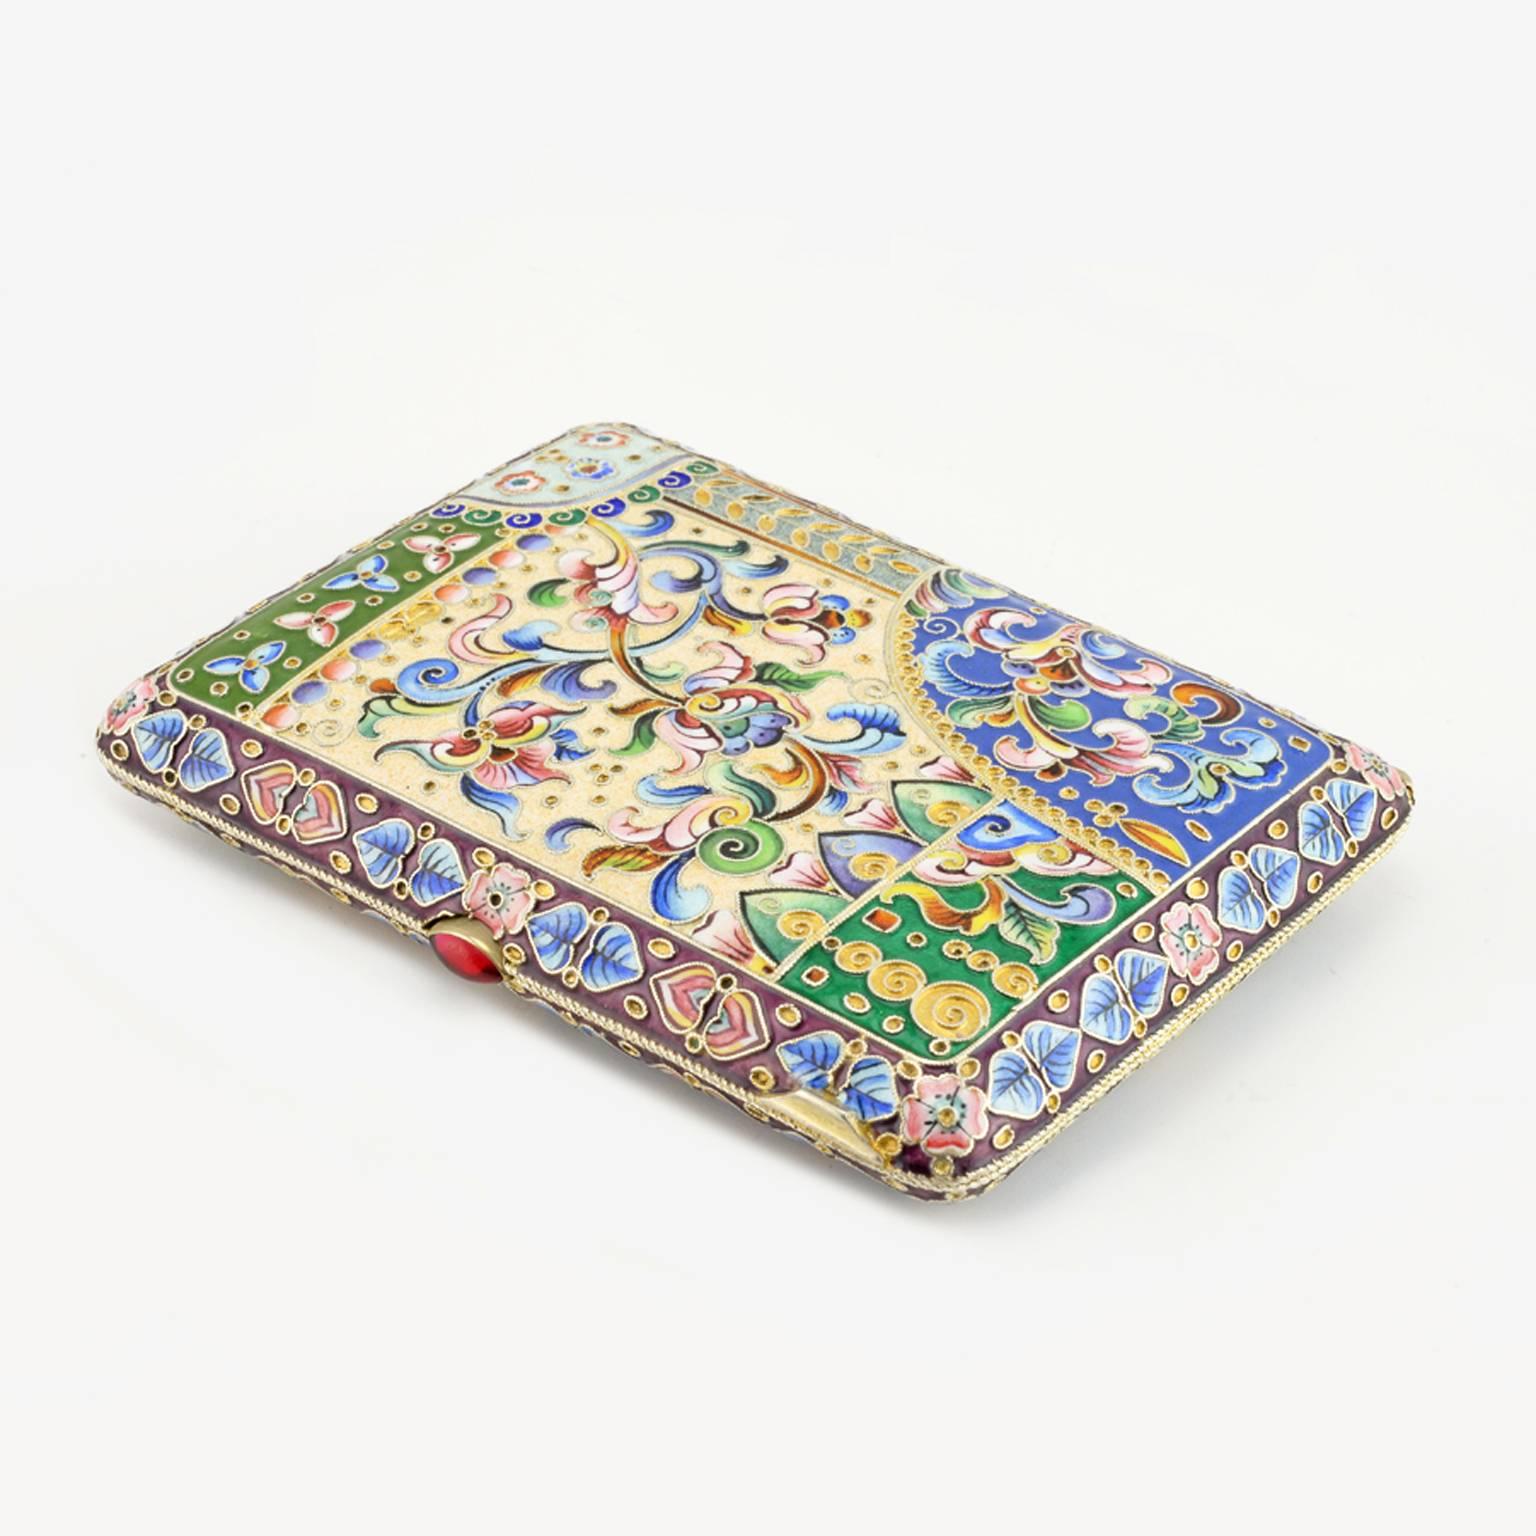 A Russian gilded silver and shaded cloisonné enamel cigarette case, Moscow, 1908-1914. Of rounded rectangle form, the exterior enameled on both sides with a central shaped rectangular reserve with brightly-colored stylized tulips and foliage against